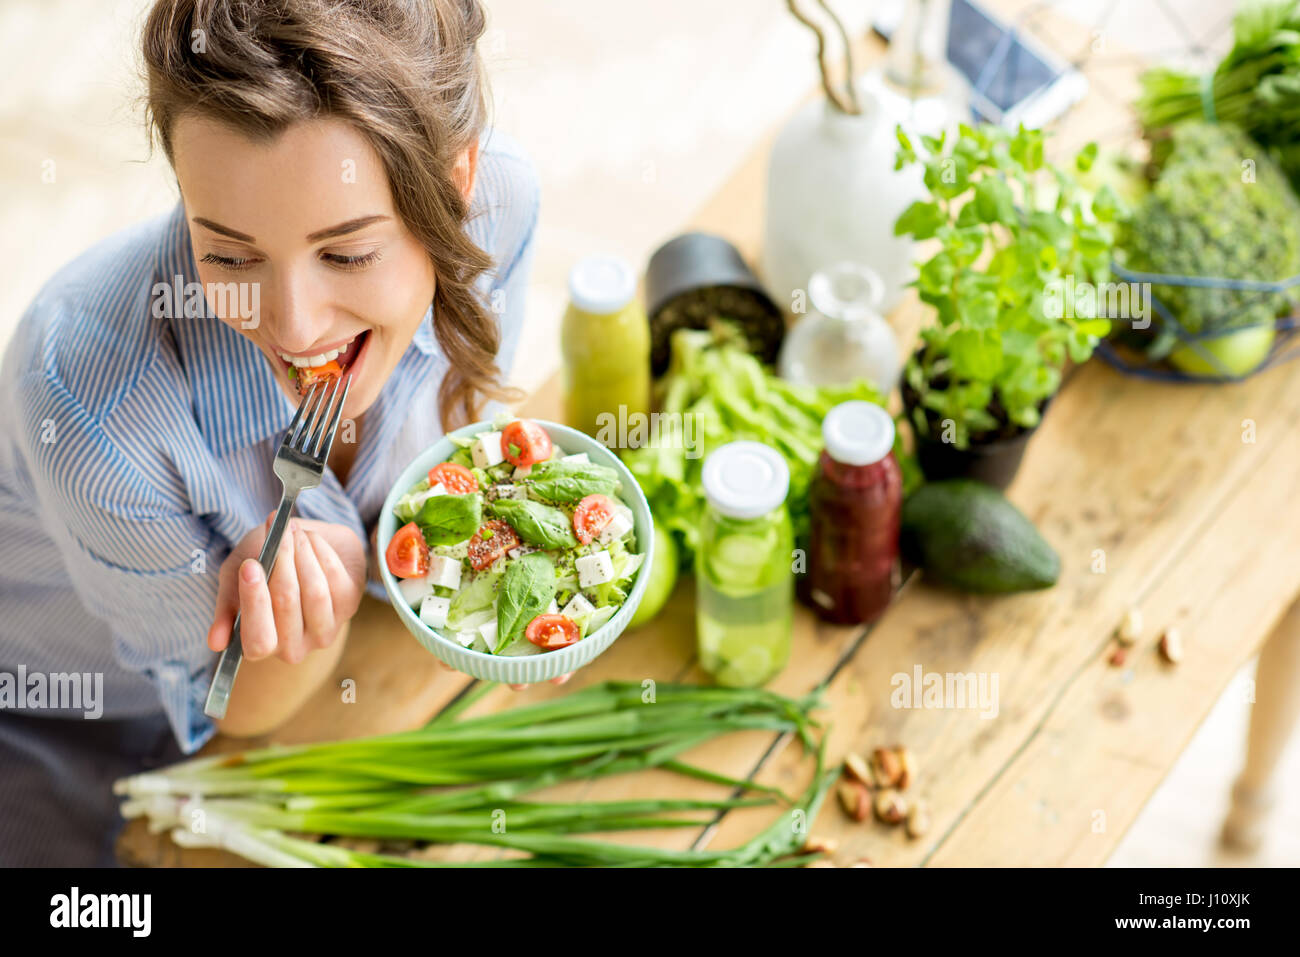 Woman eating healthy salad Banque D'Images